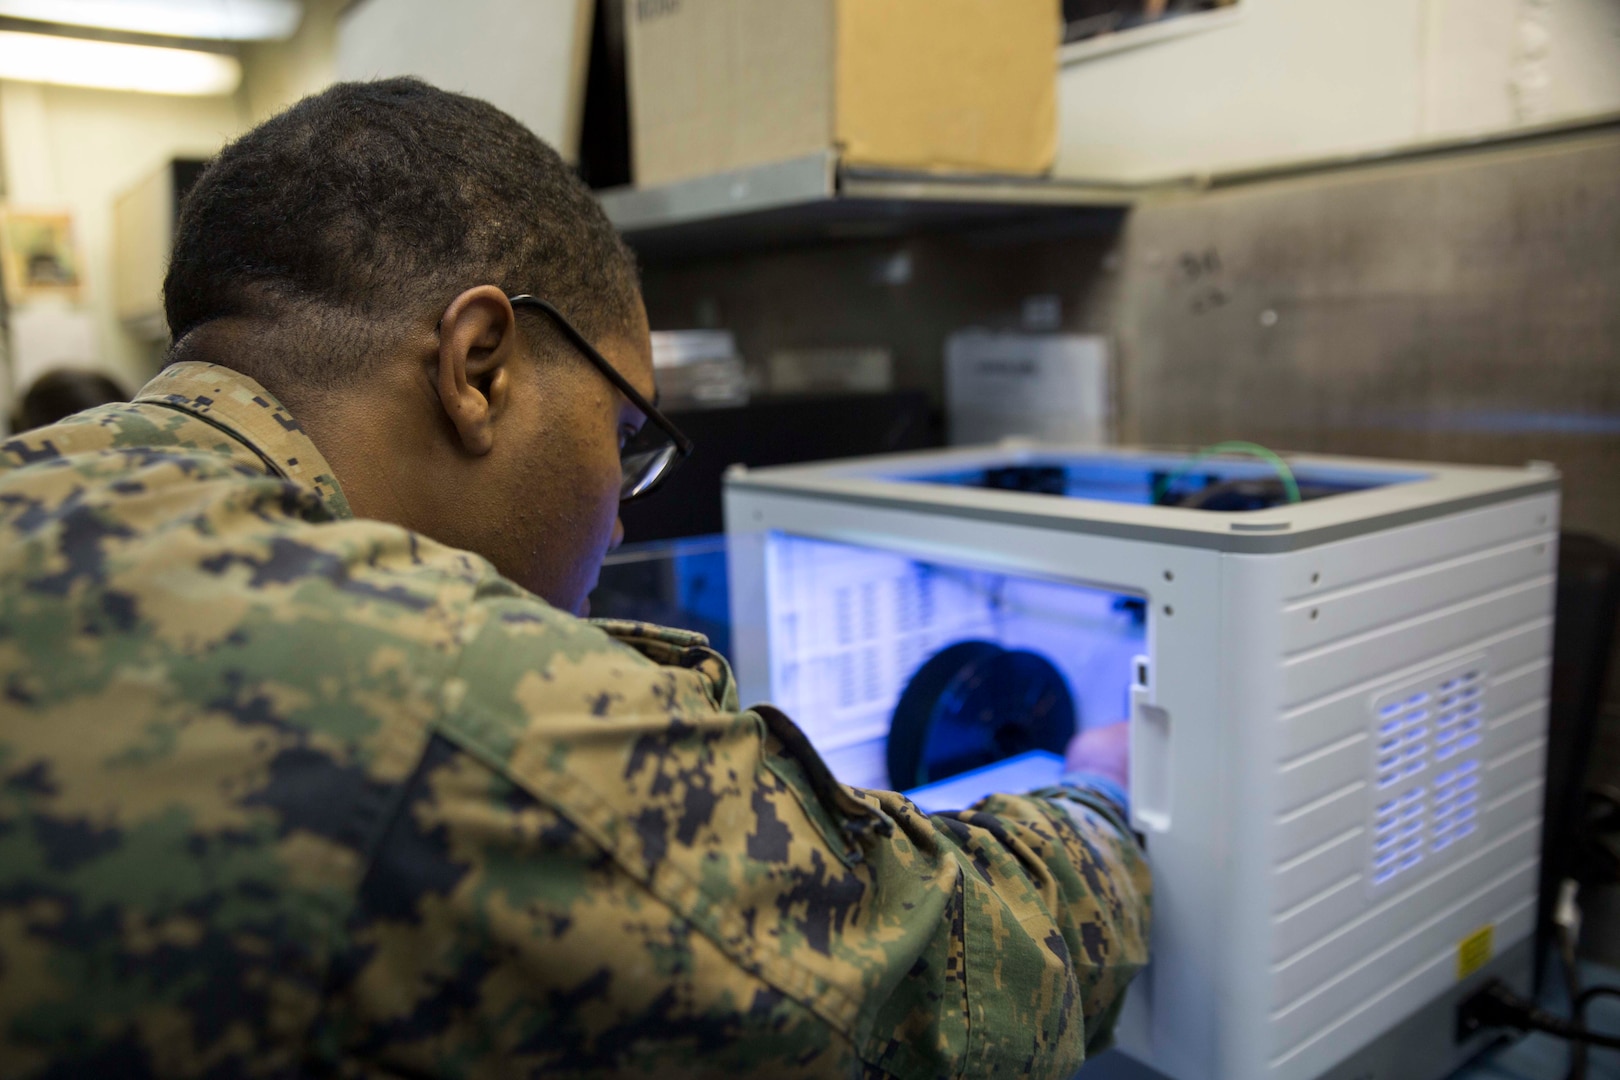 Marine with Combat Logistics Battalion 31, 31st Marine Expeditionary Unit, prepares to print 3D model aboard USS Wasp while underway in Pacific Ocean, April 7, 2018 (U.S. Marine Corps/Bernadette Wildes)